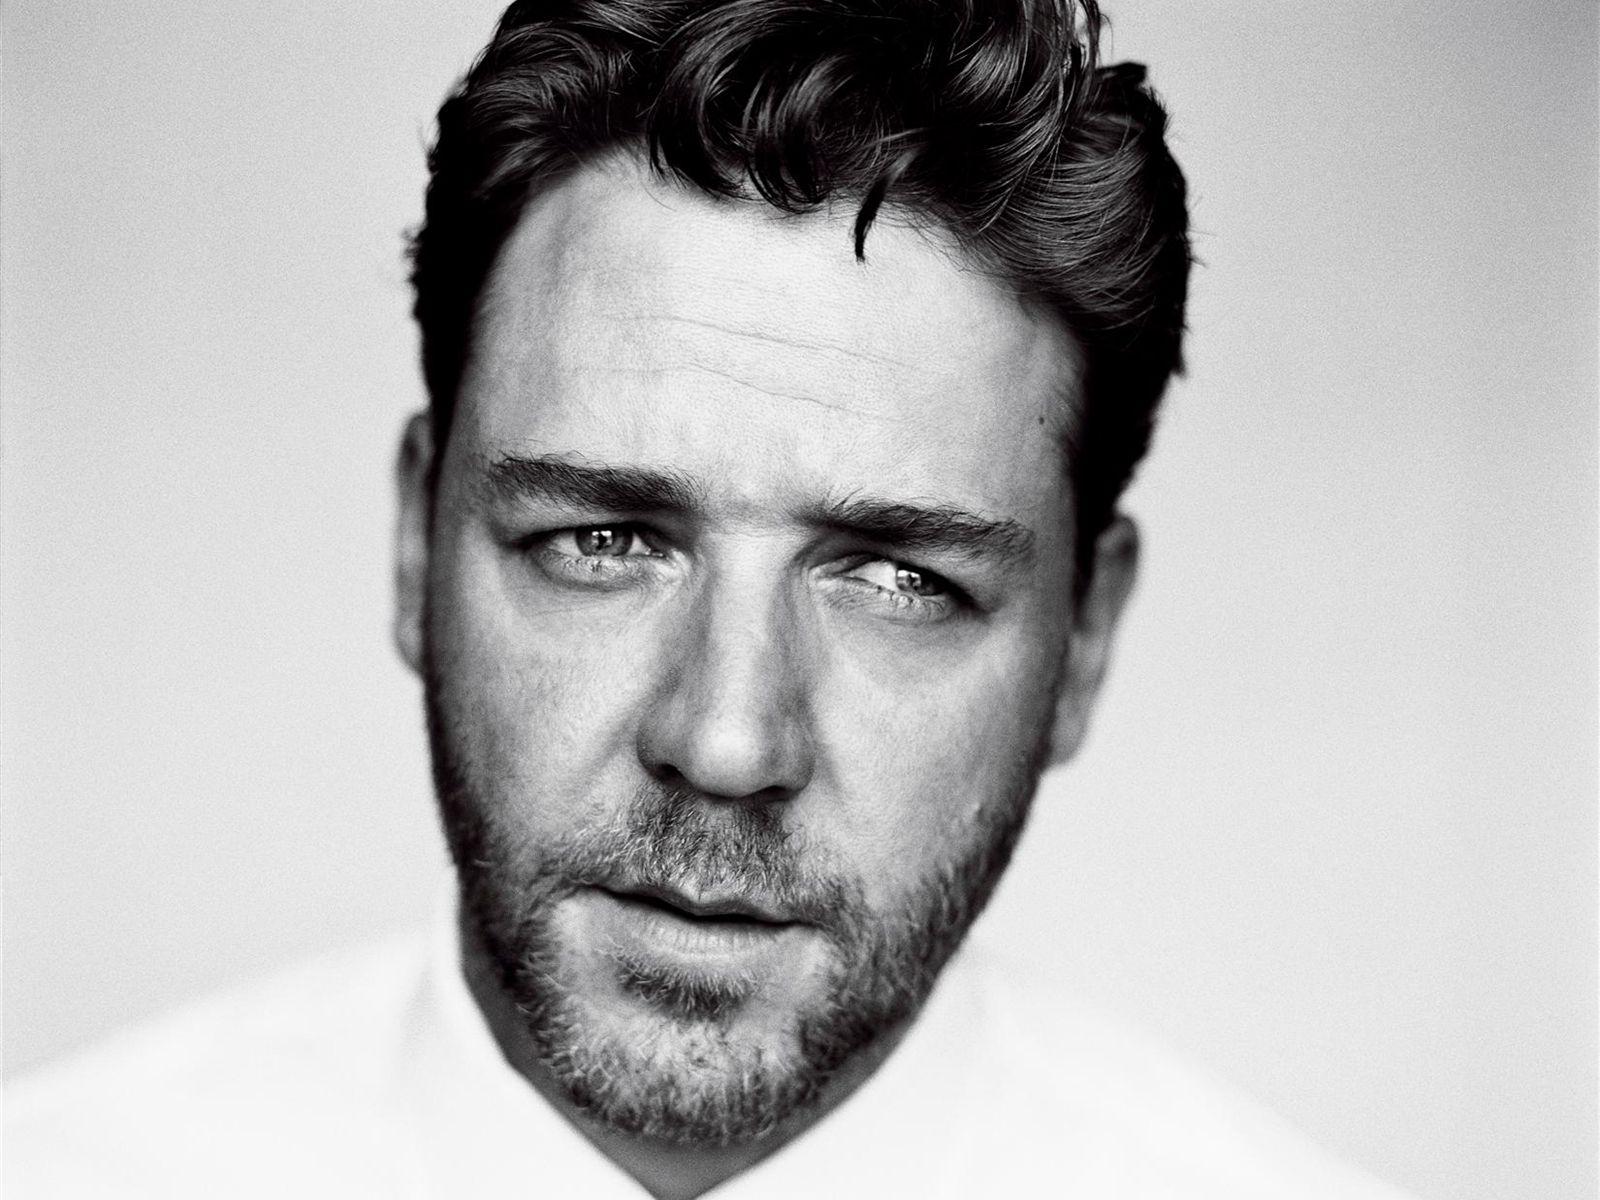 Russell Crowe Wallpaper, High Definition, High Quality